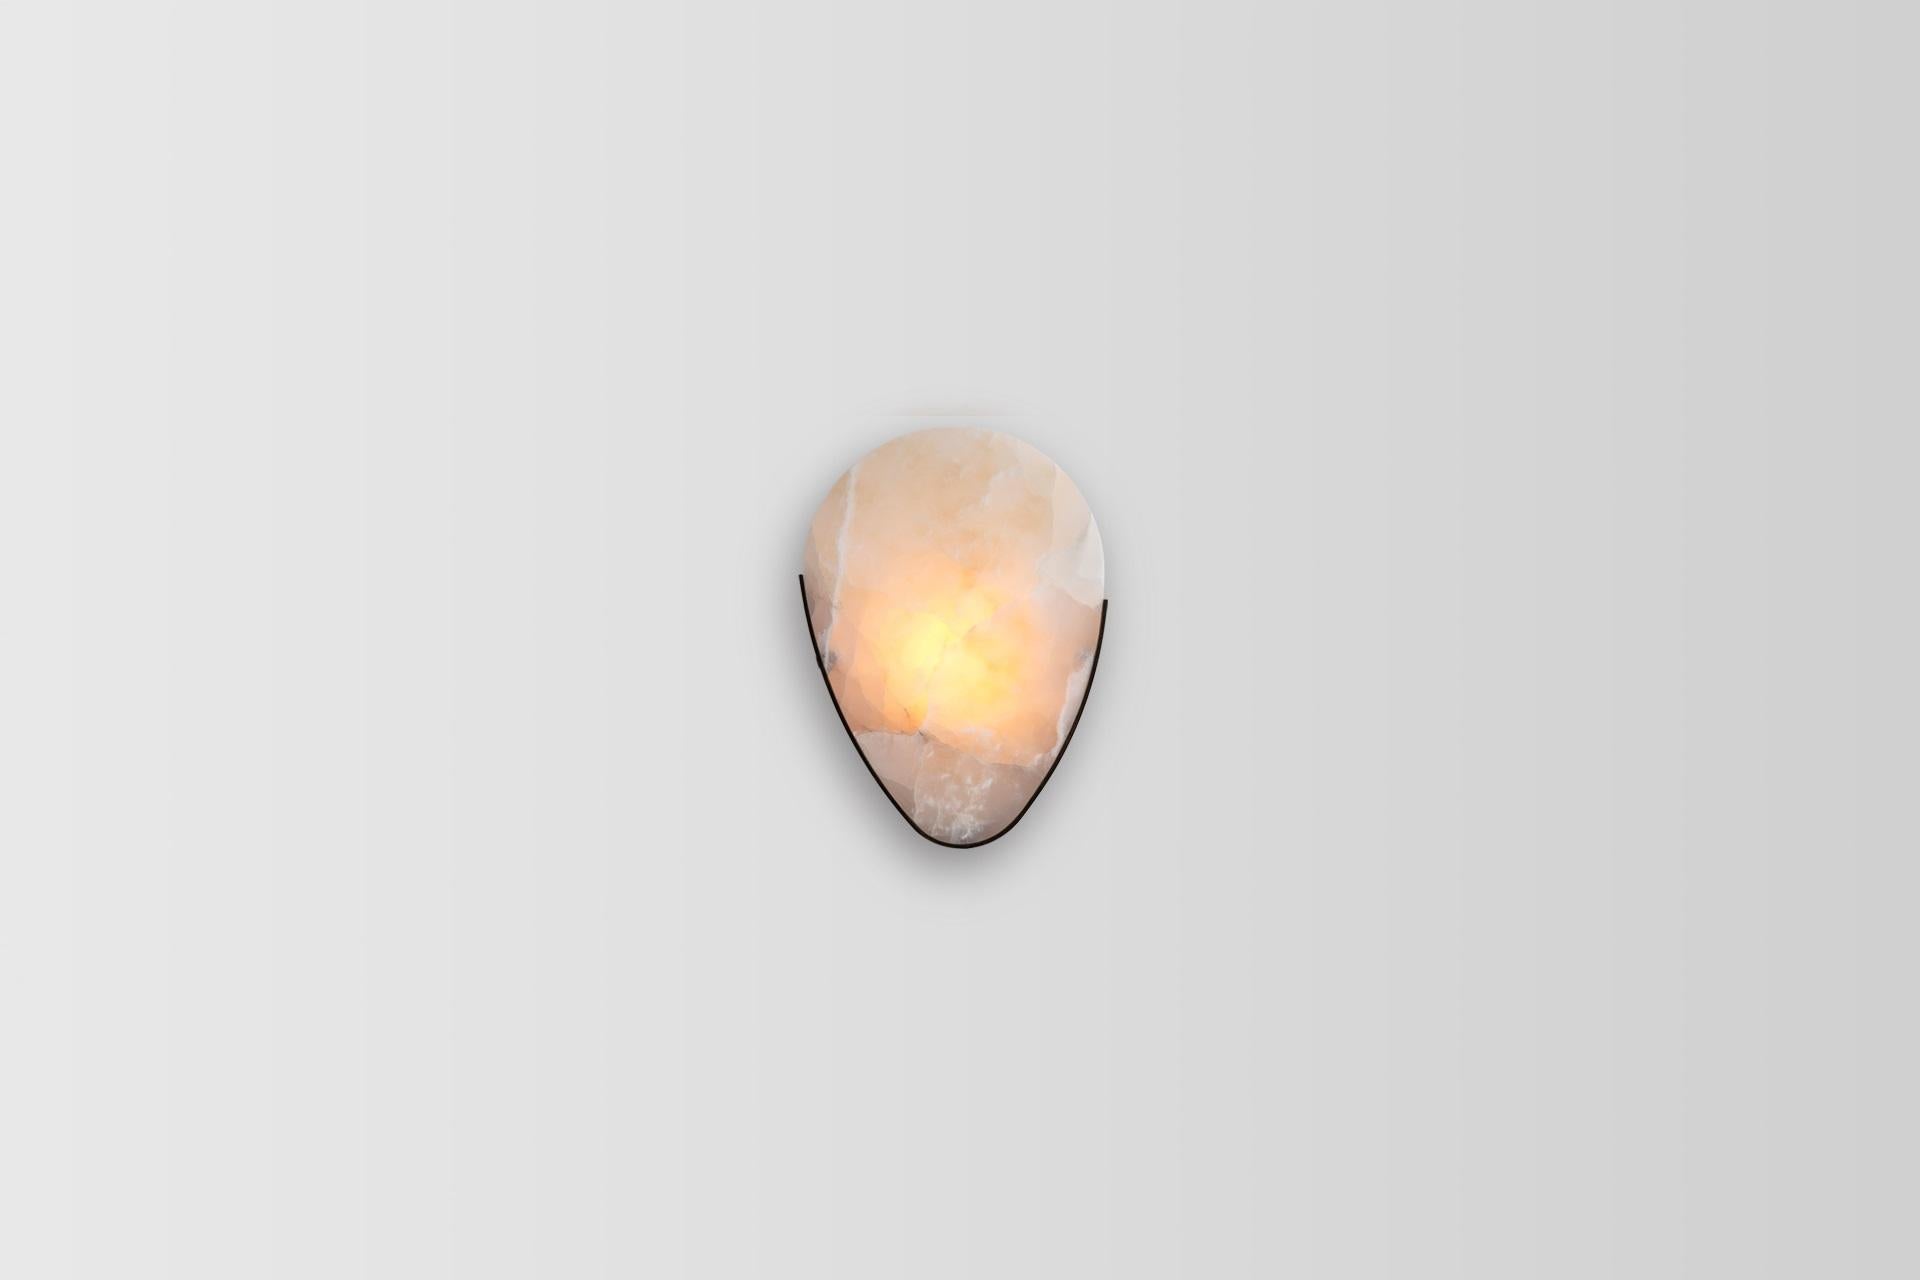 Teardrop marble wall lamp by Atra Design
Dimensions: D 28 x W 15 x H 38 cm
Materials: Taj Mahal marble, brass

Atra Design
We are Atra, a furniture brand produced by Atra form a mexico city–based high end production facility that also houses